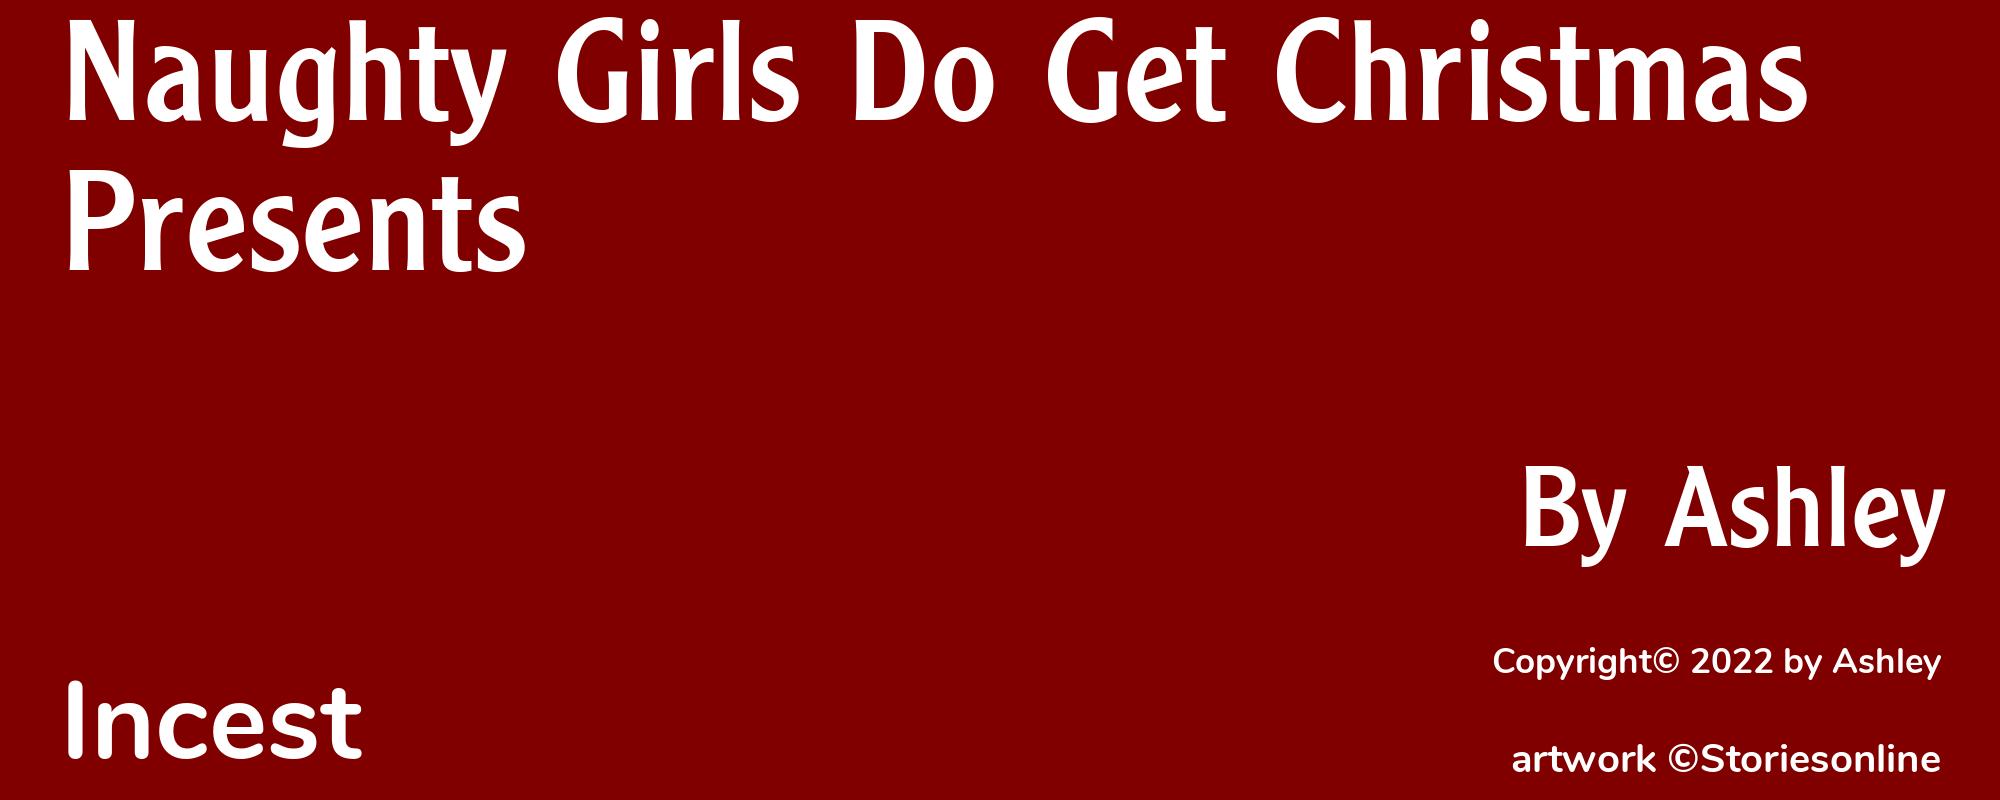 Naughty Girls Do Get Christmas Presents - Cover